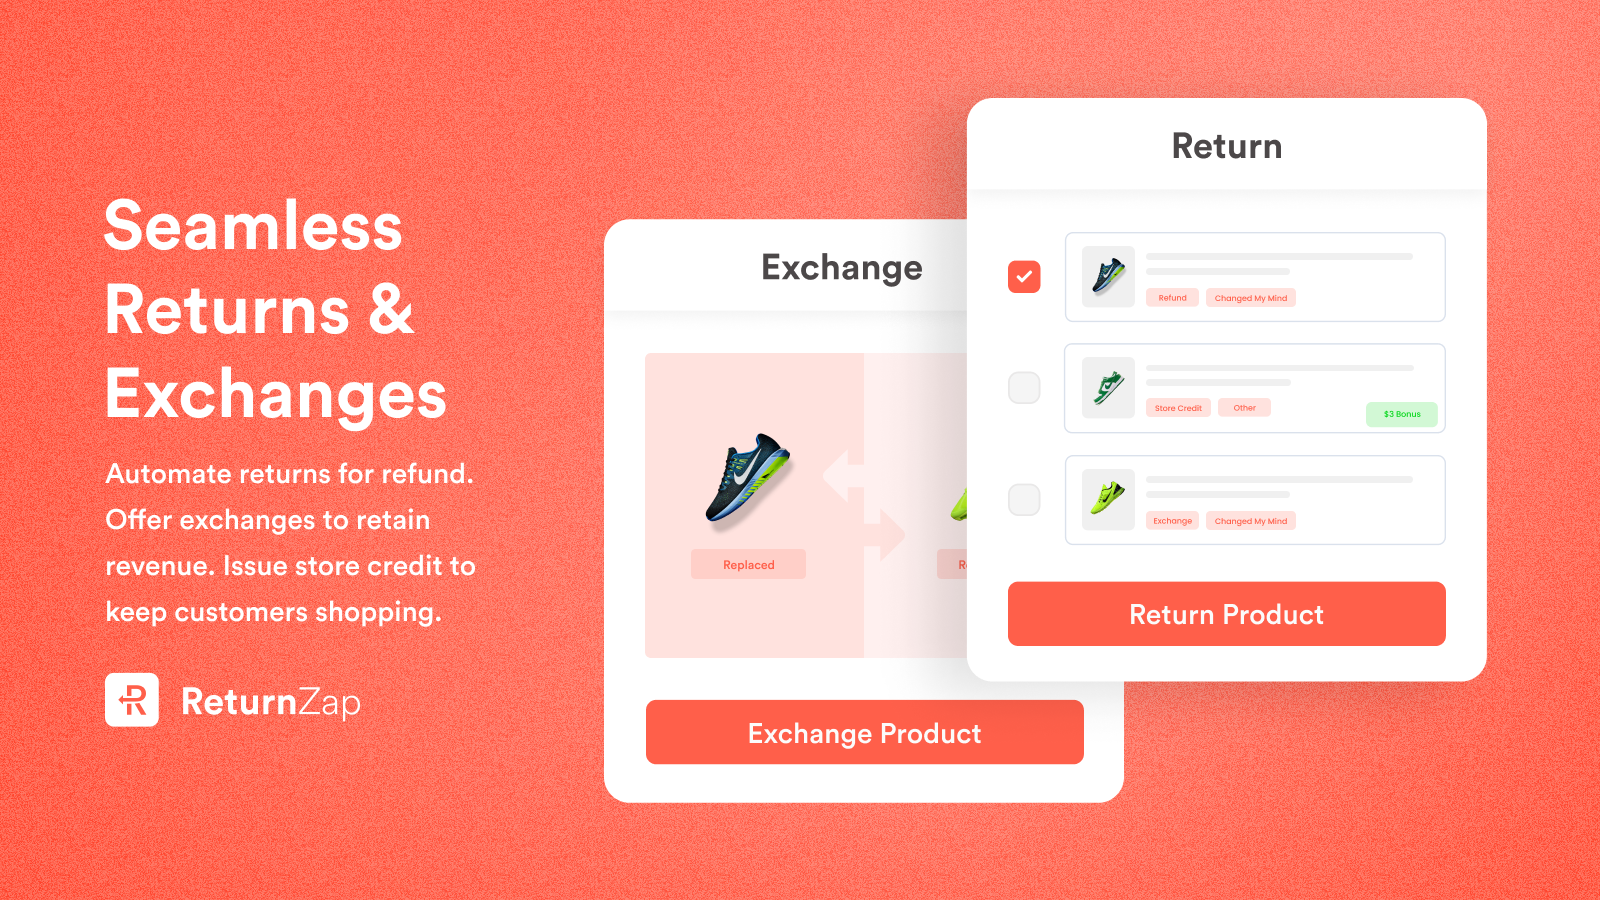 Returns, exchanges, store credit, and return portal